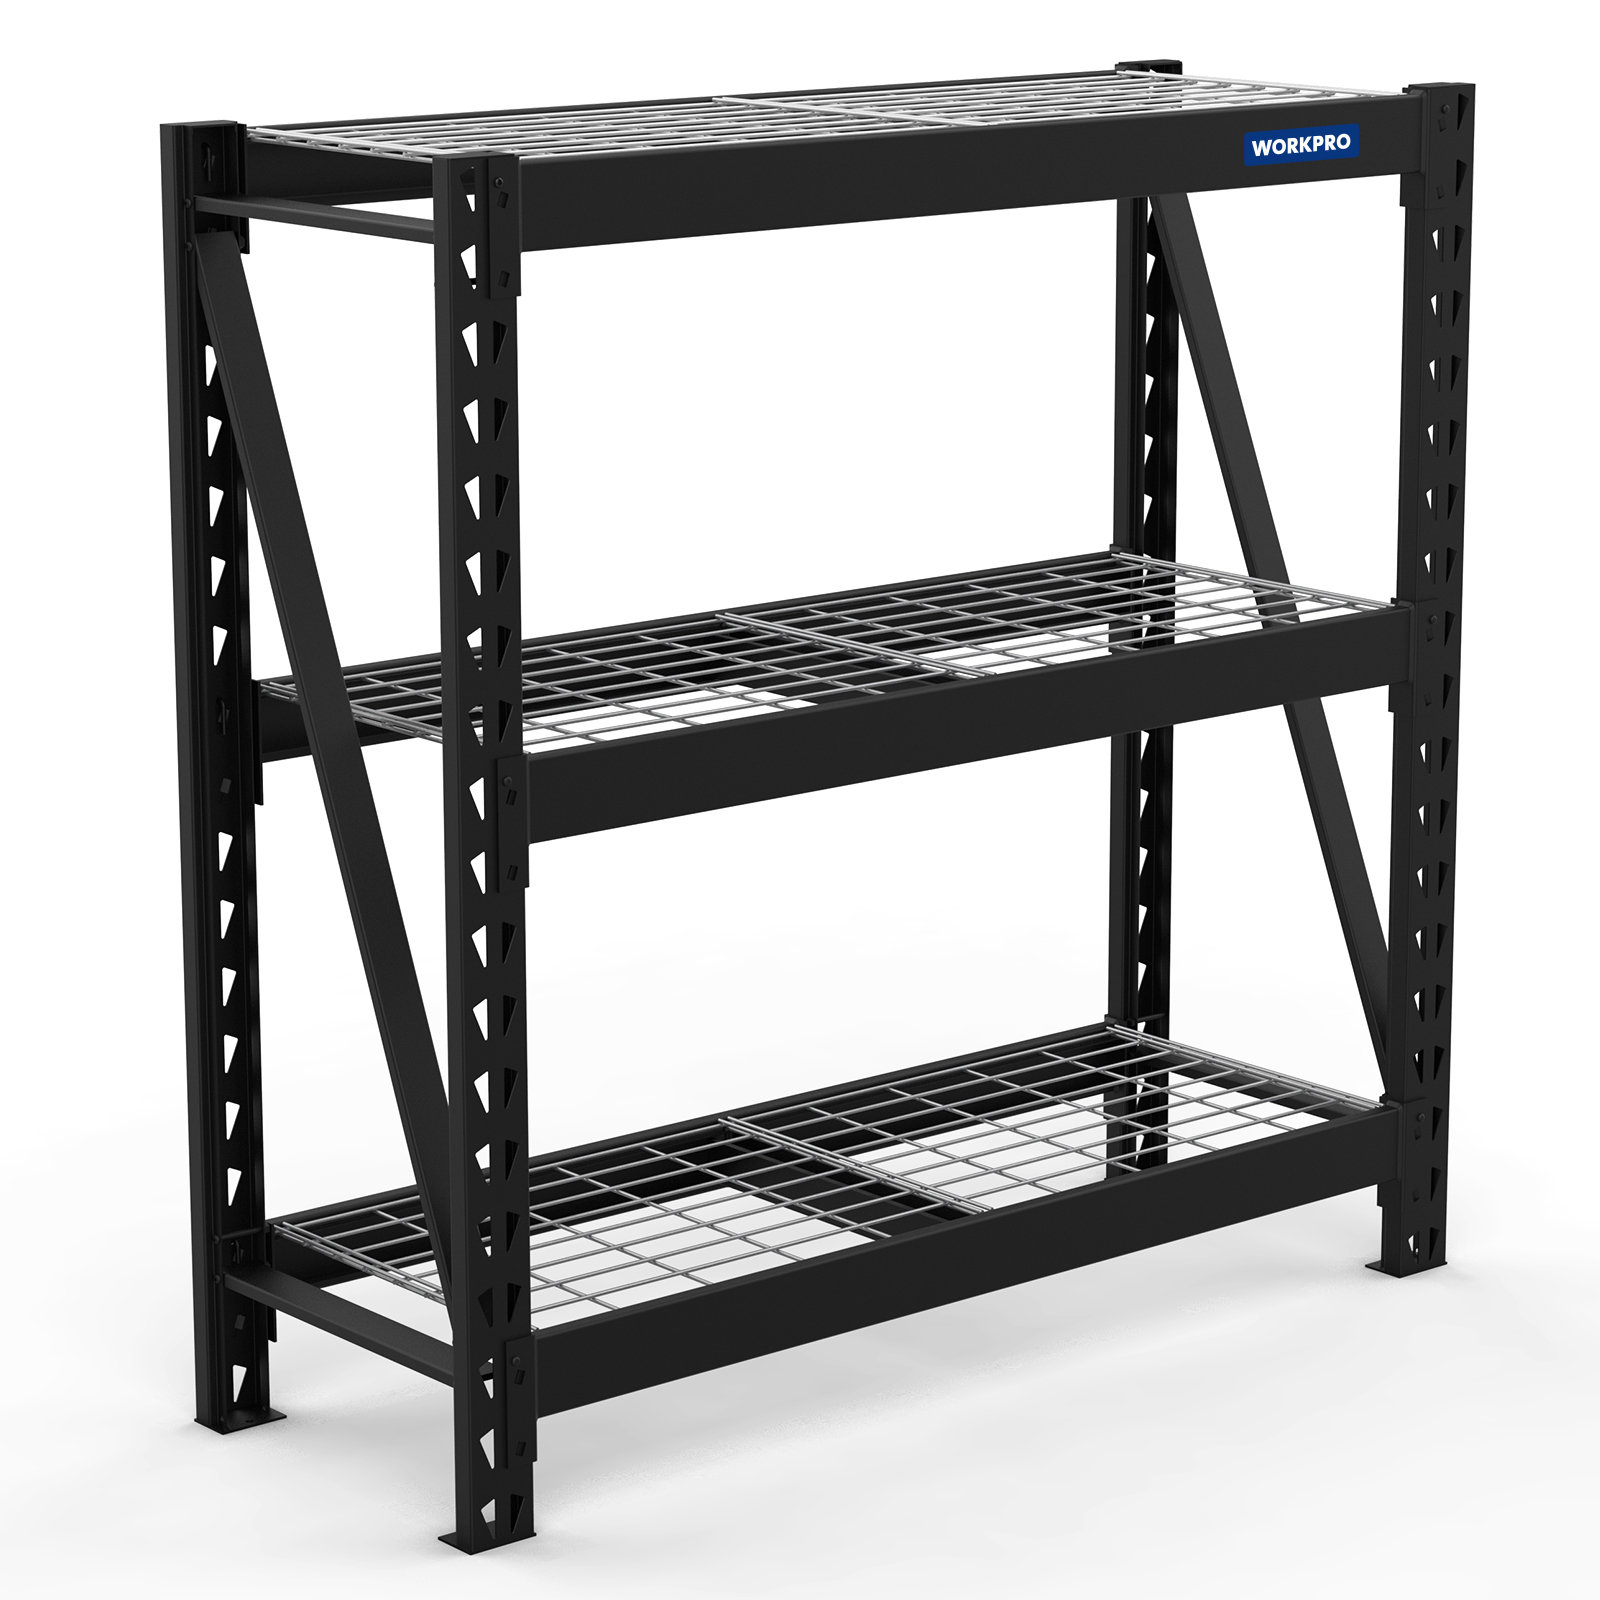 WORKPRO 3-Tier Garage Shelving Unit, Heavy Duty Metal Storage Rack, 50”W X  47”H X 18”D Height Adjustable, Industrial Shelving For Garage, Warehouse,  Shop, 5400 LBS Load Capacity & Reviews